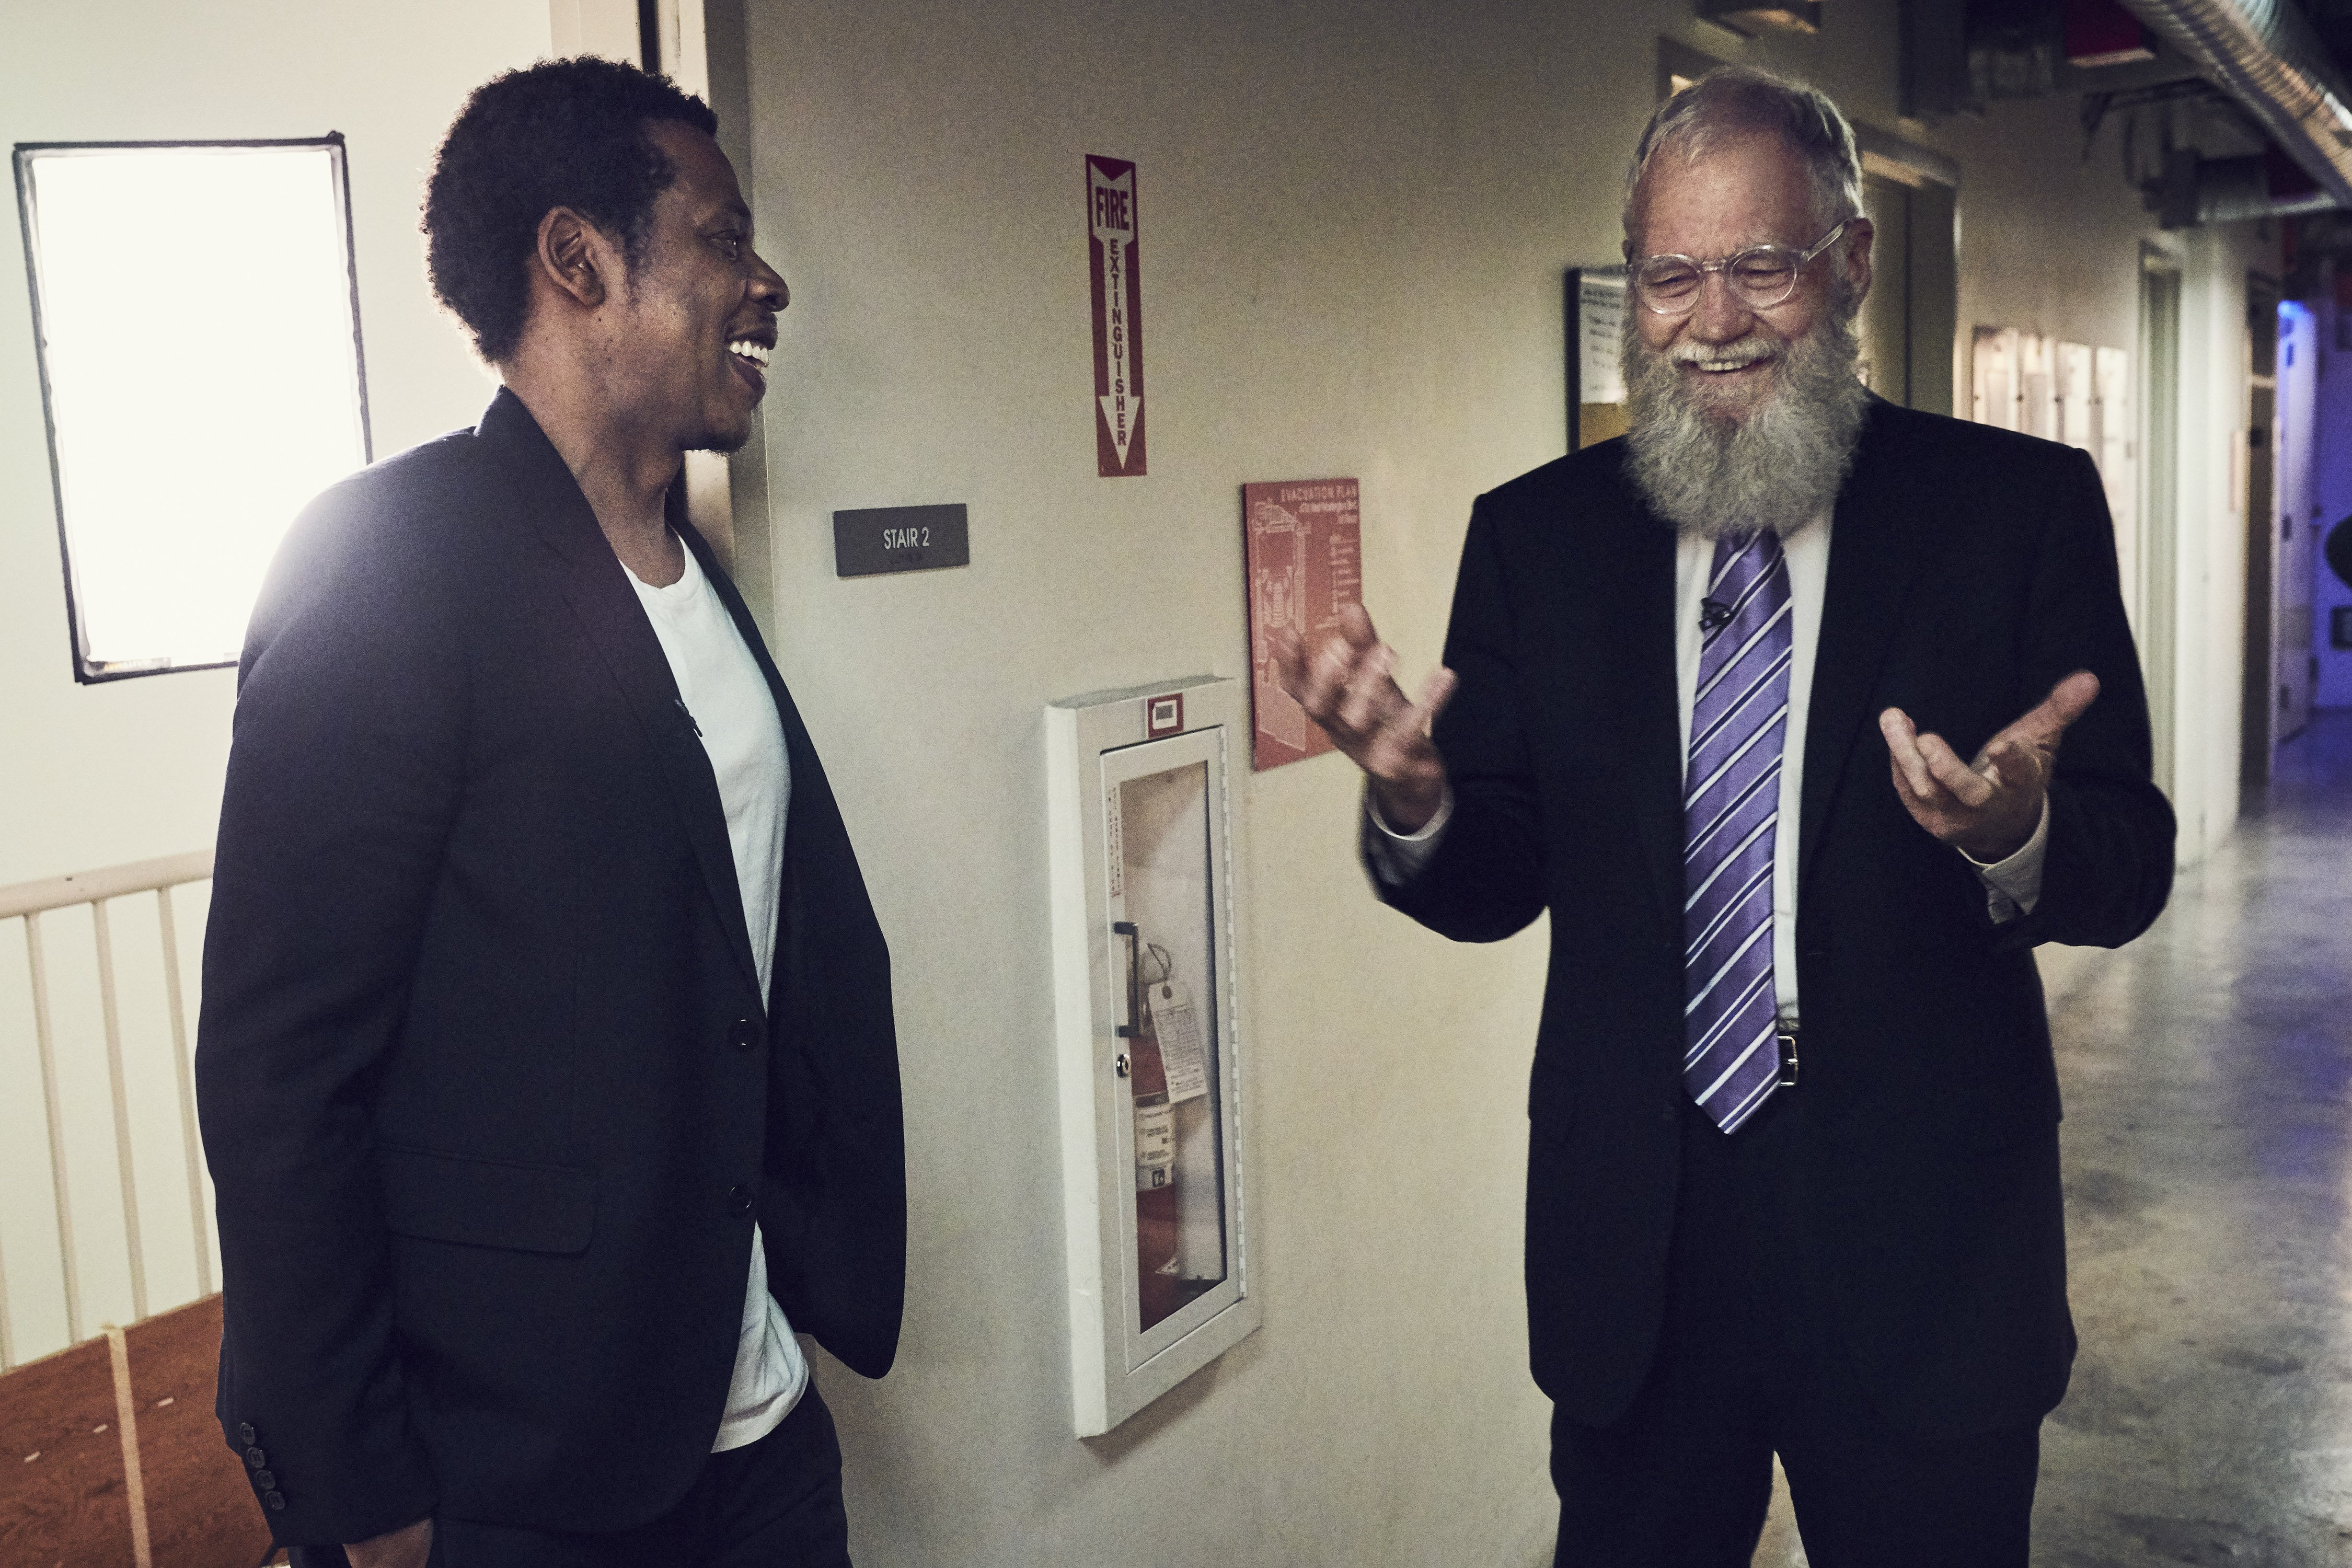 Get a First Look at Jay-Z Breaking Down the Game for David Letterman